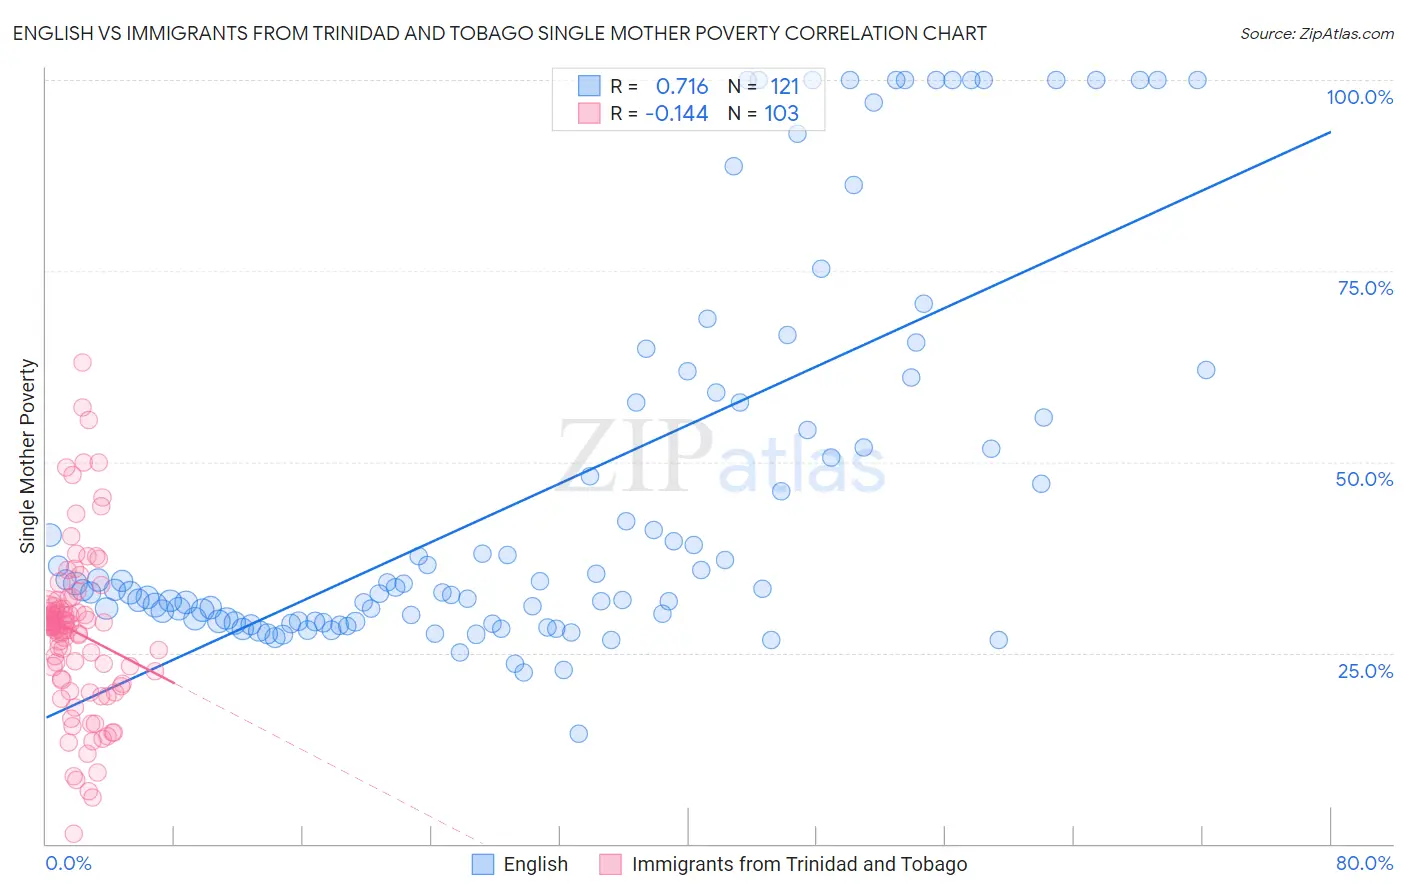 English vs Immigrants from Trinidad and Tobago Single Mother Poverty